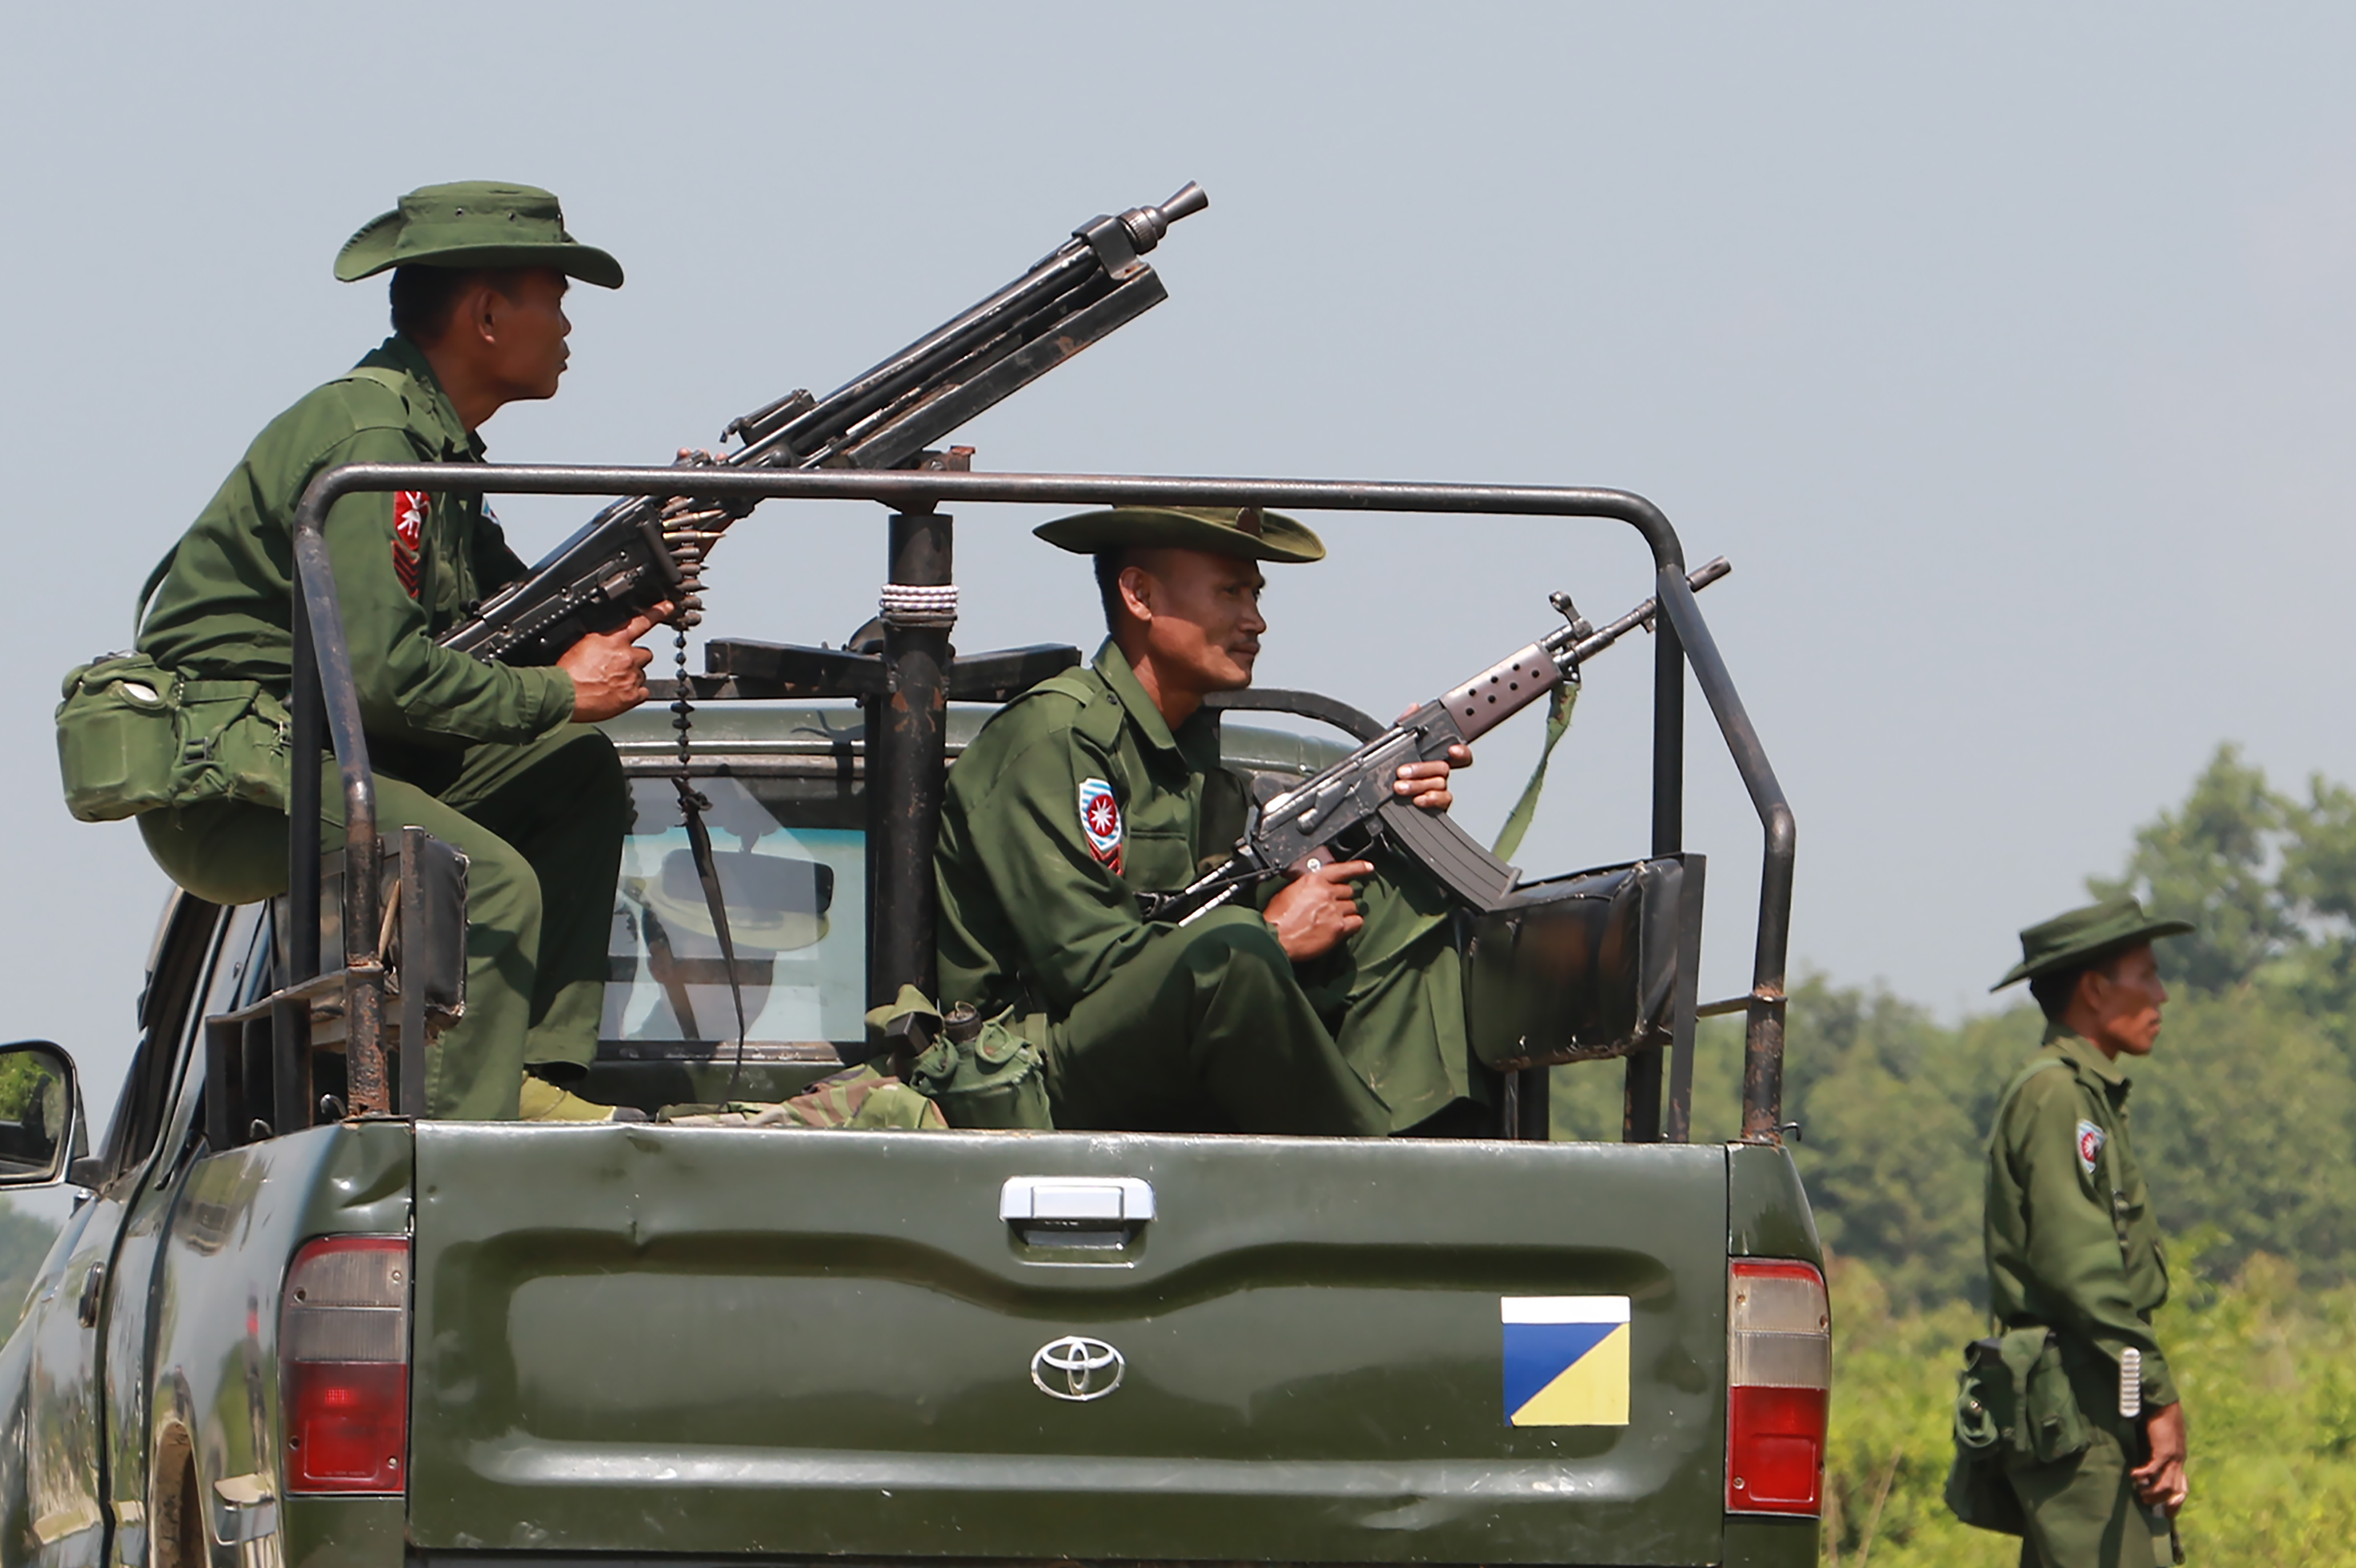 Heavily armed Myanmar army troops patrol in Maungdaw, Myanmar near the Bangladeshi border on Oct. 16, 2016. (Khine Htoo Mrat—AFP/Getty Images)